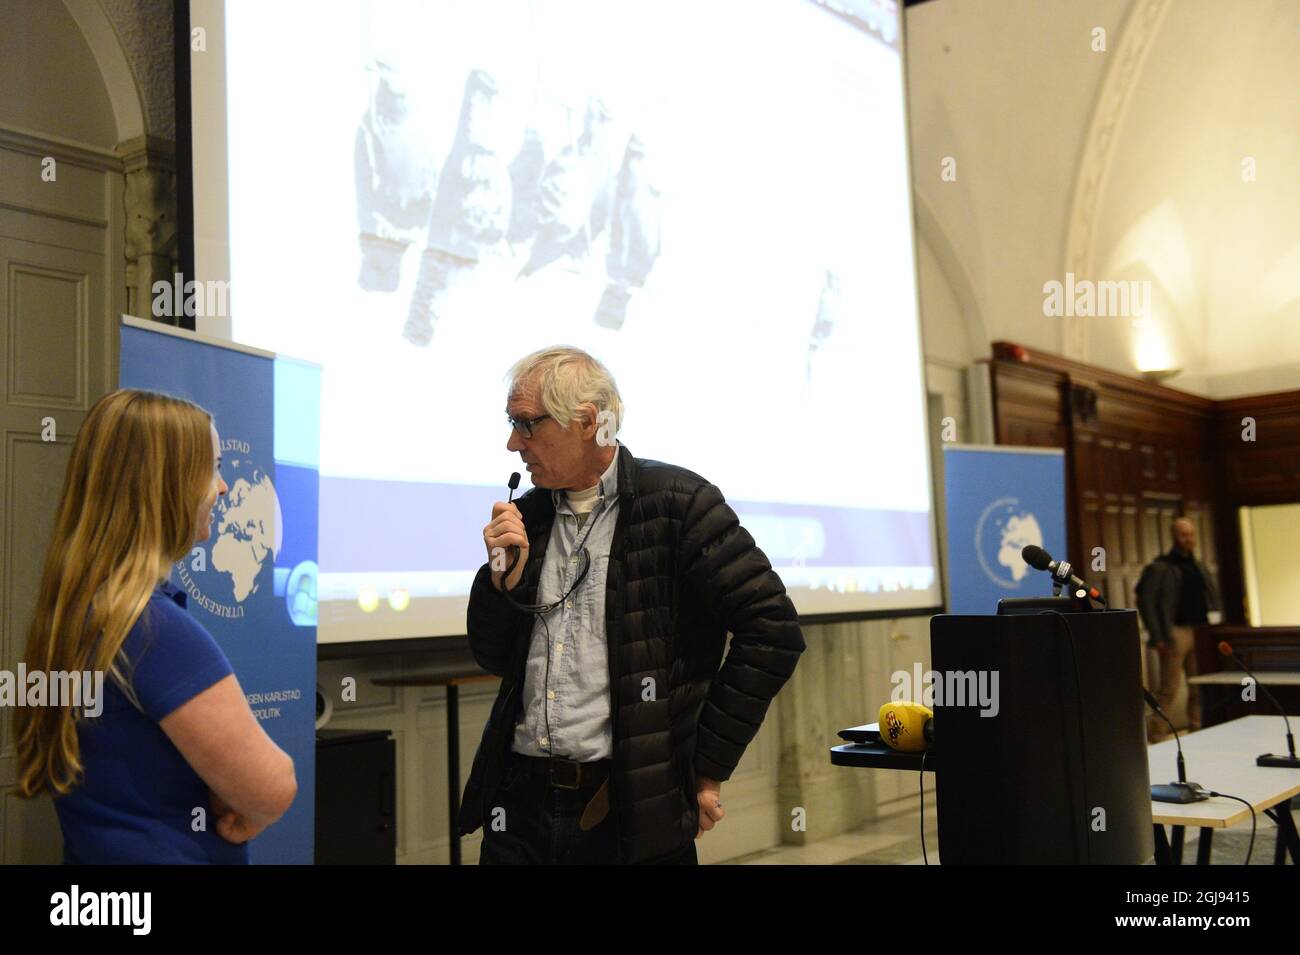 KARLSTAD 2015-03-16 Swedish artist and cartoonist Lars Vilks is seen during his lecture on ' Charlie Hebdo and the limits of Free SpeechÂ” in Karlstad, Sweden, March 16, 2015. Vilks, who once depicted the Prophet Muhammad as a dog, is believed to be one of the targets in a gun attack in Copenhagen last month. His lecture was surrounded by armed police. Foto: Maja Suslin / TT / kod 10300  Stock Photo